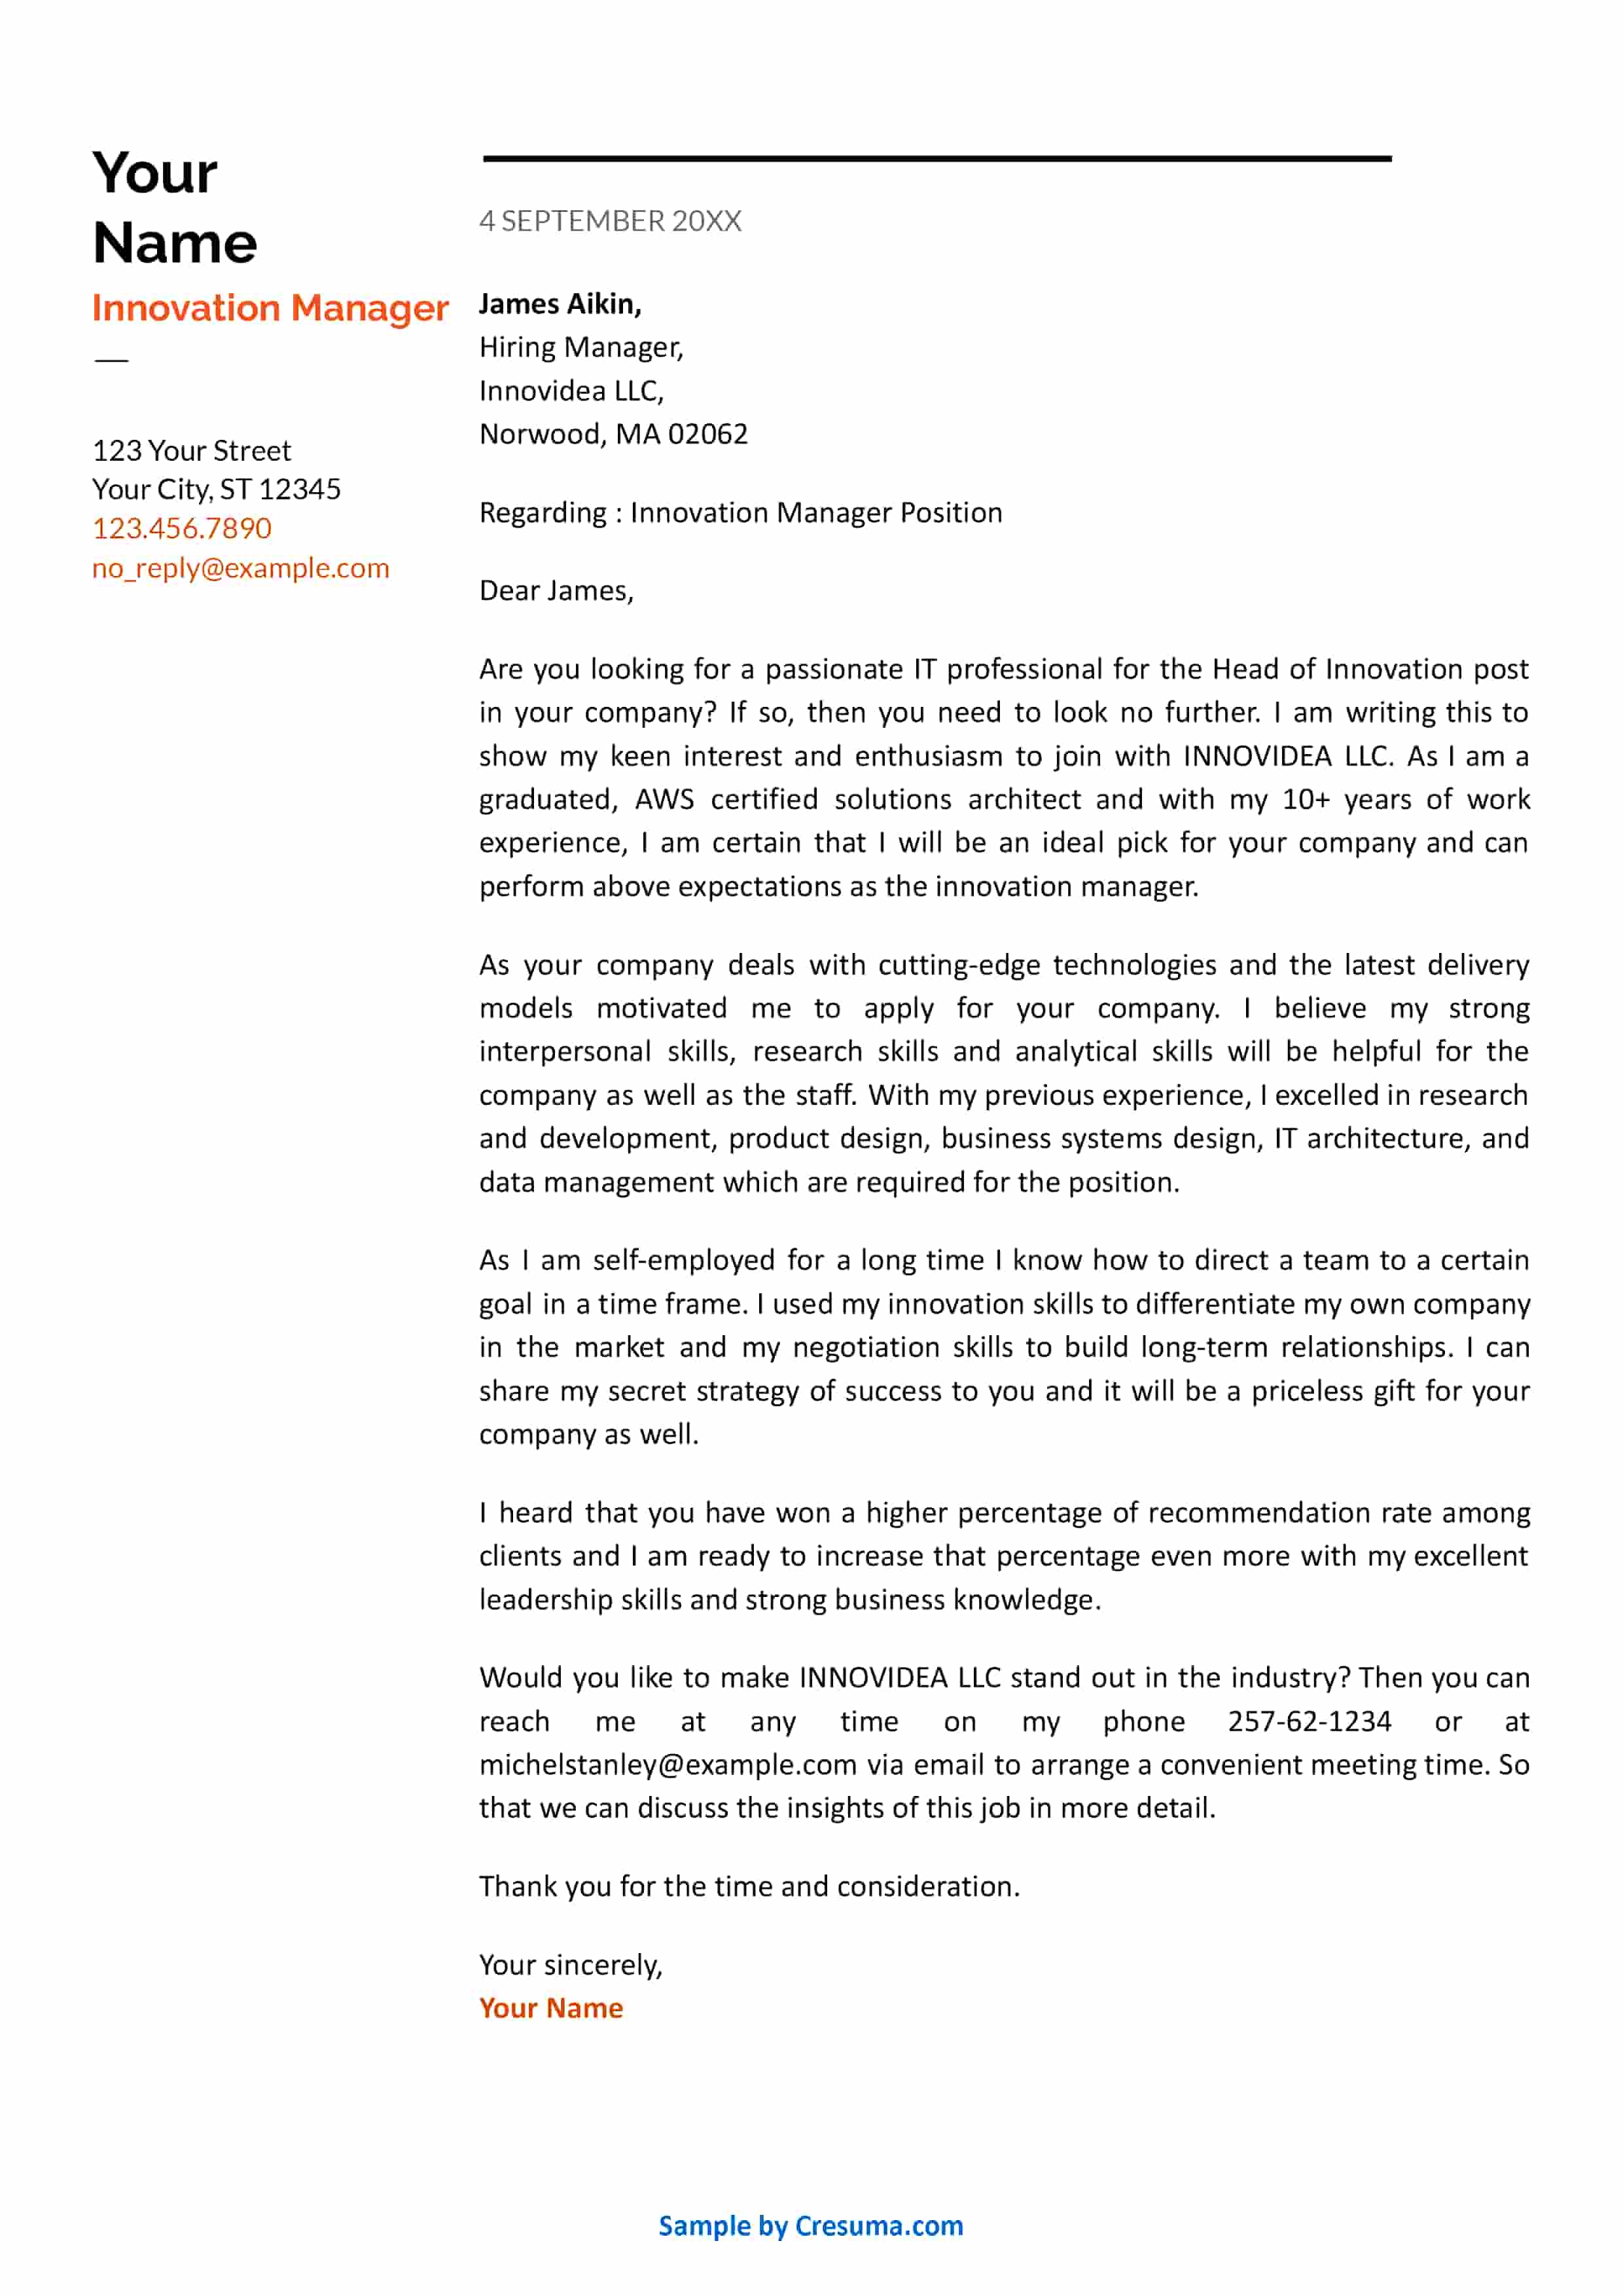 Innovation Manager cover letter example template 1